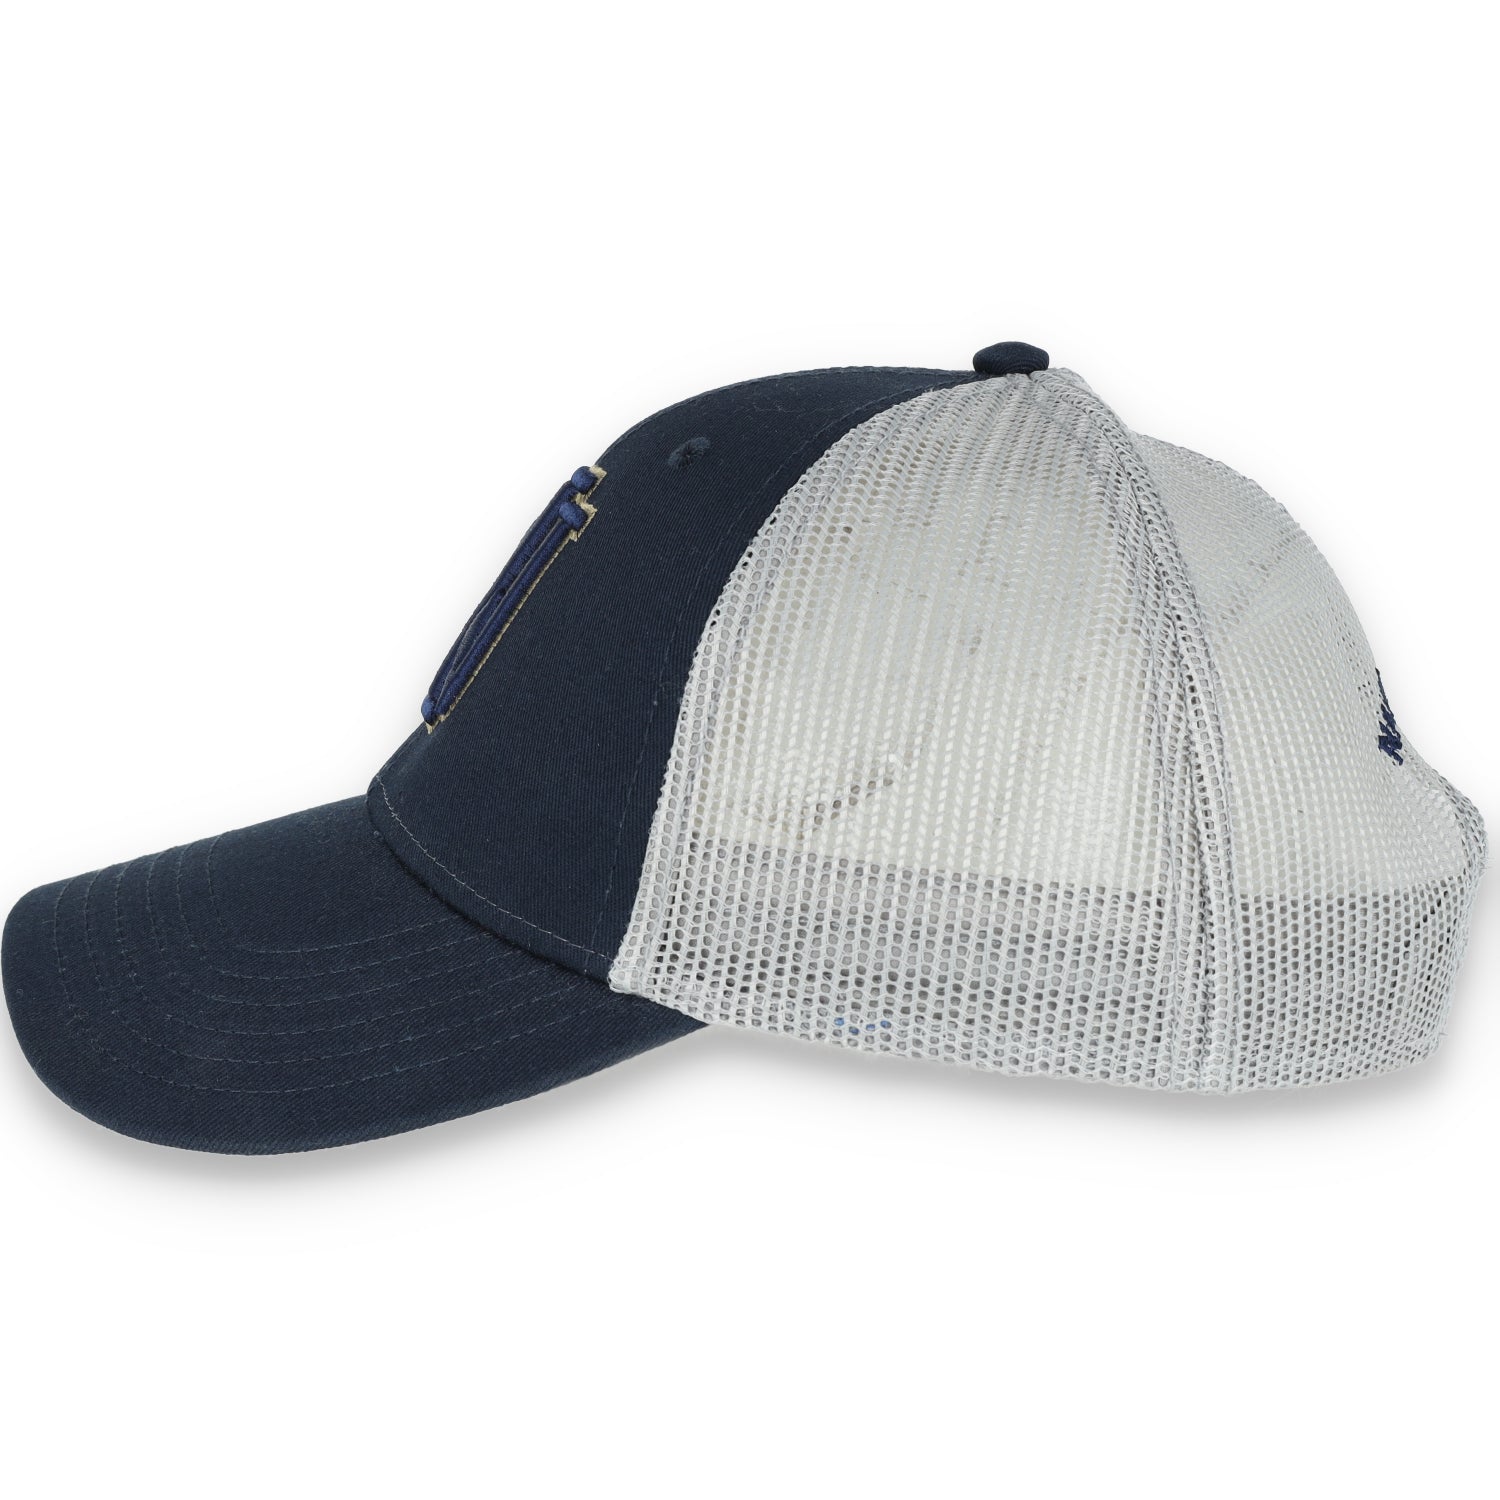 Napa High Indians Low Profile Trucker with Modified Flat Bill Cap-Navy/GREY